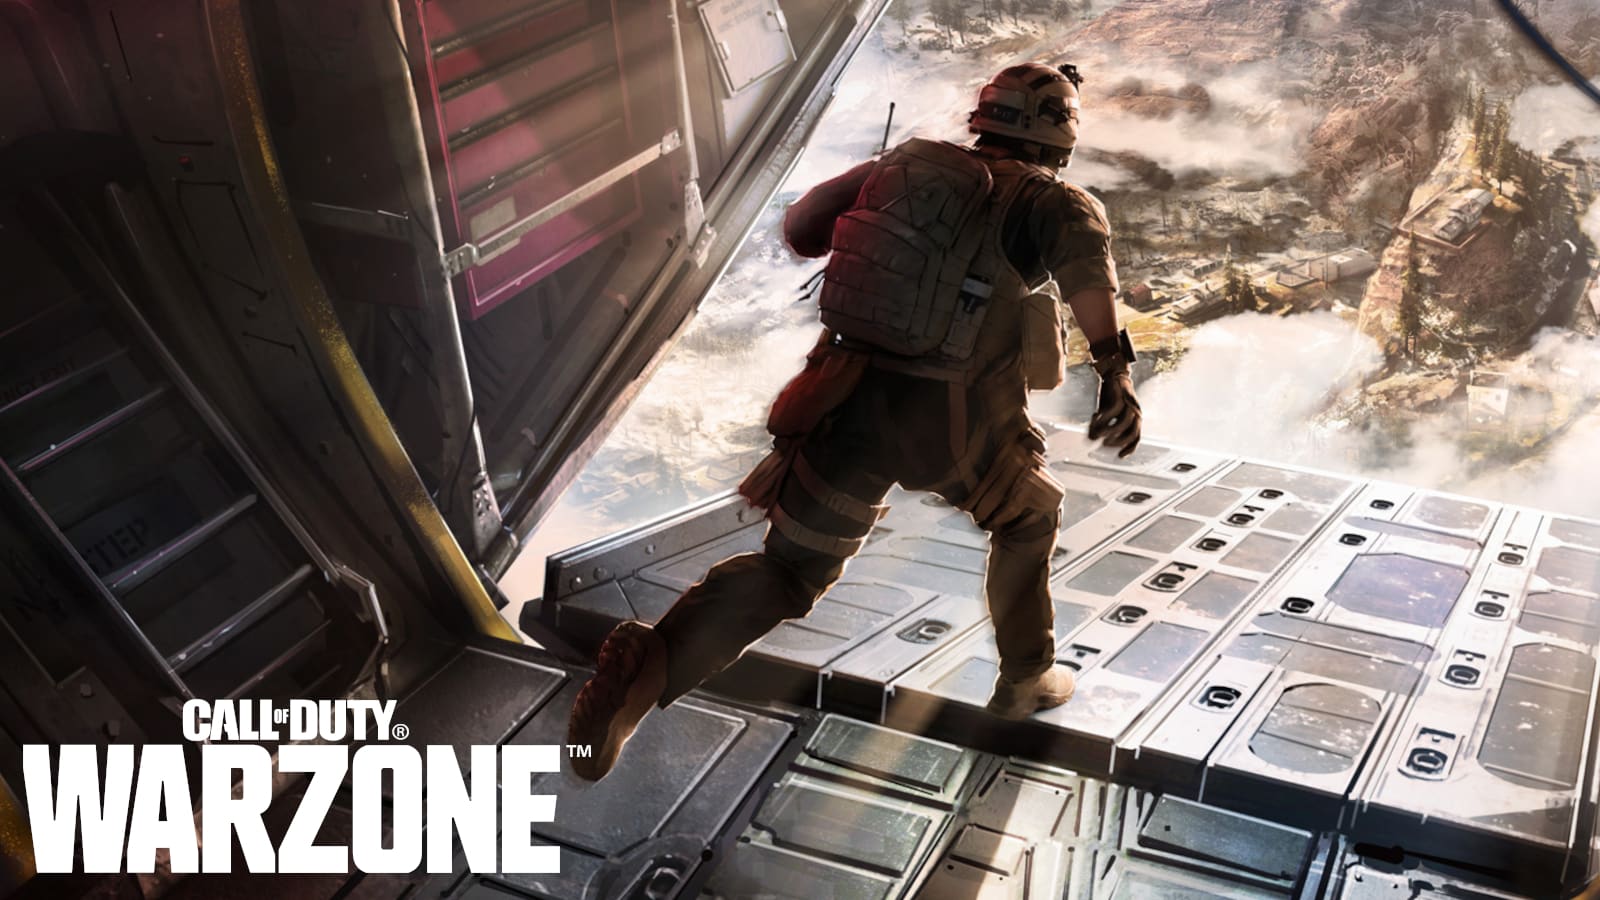 Call of Duty Mobile WARZONE.. 